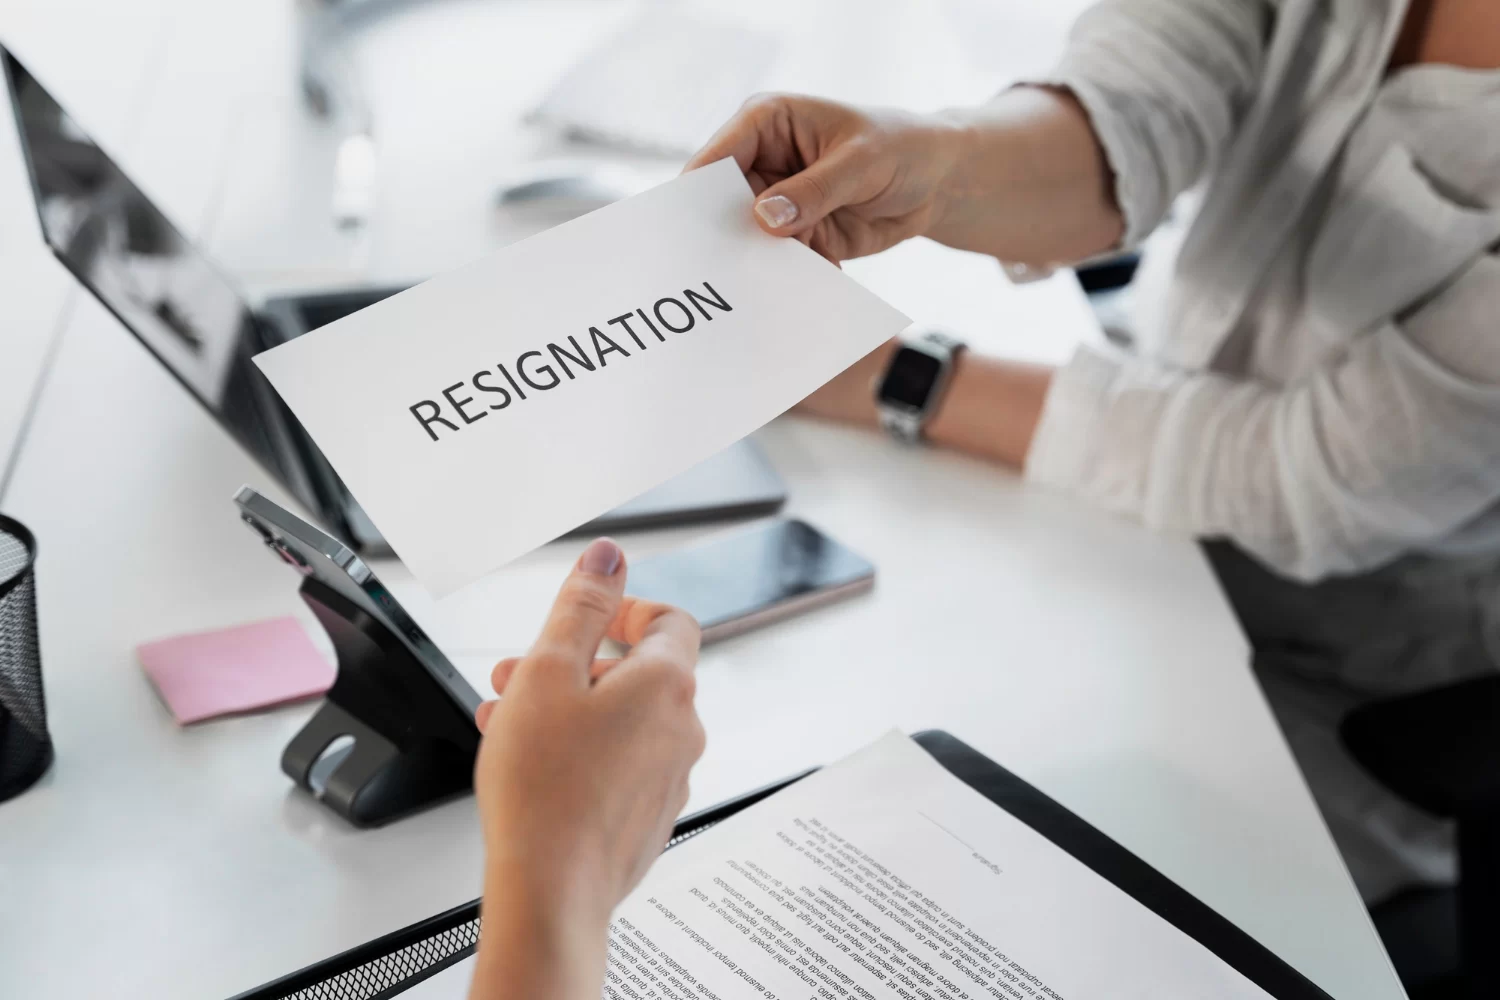 How to write a job resignation letter?